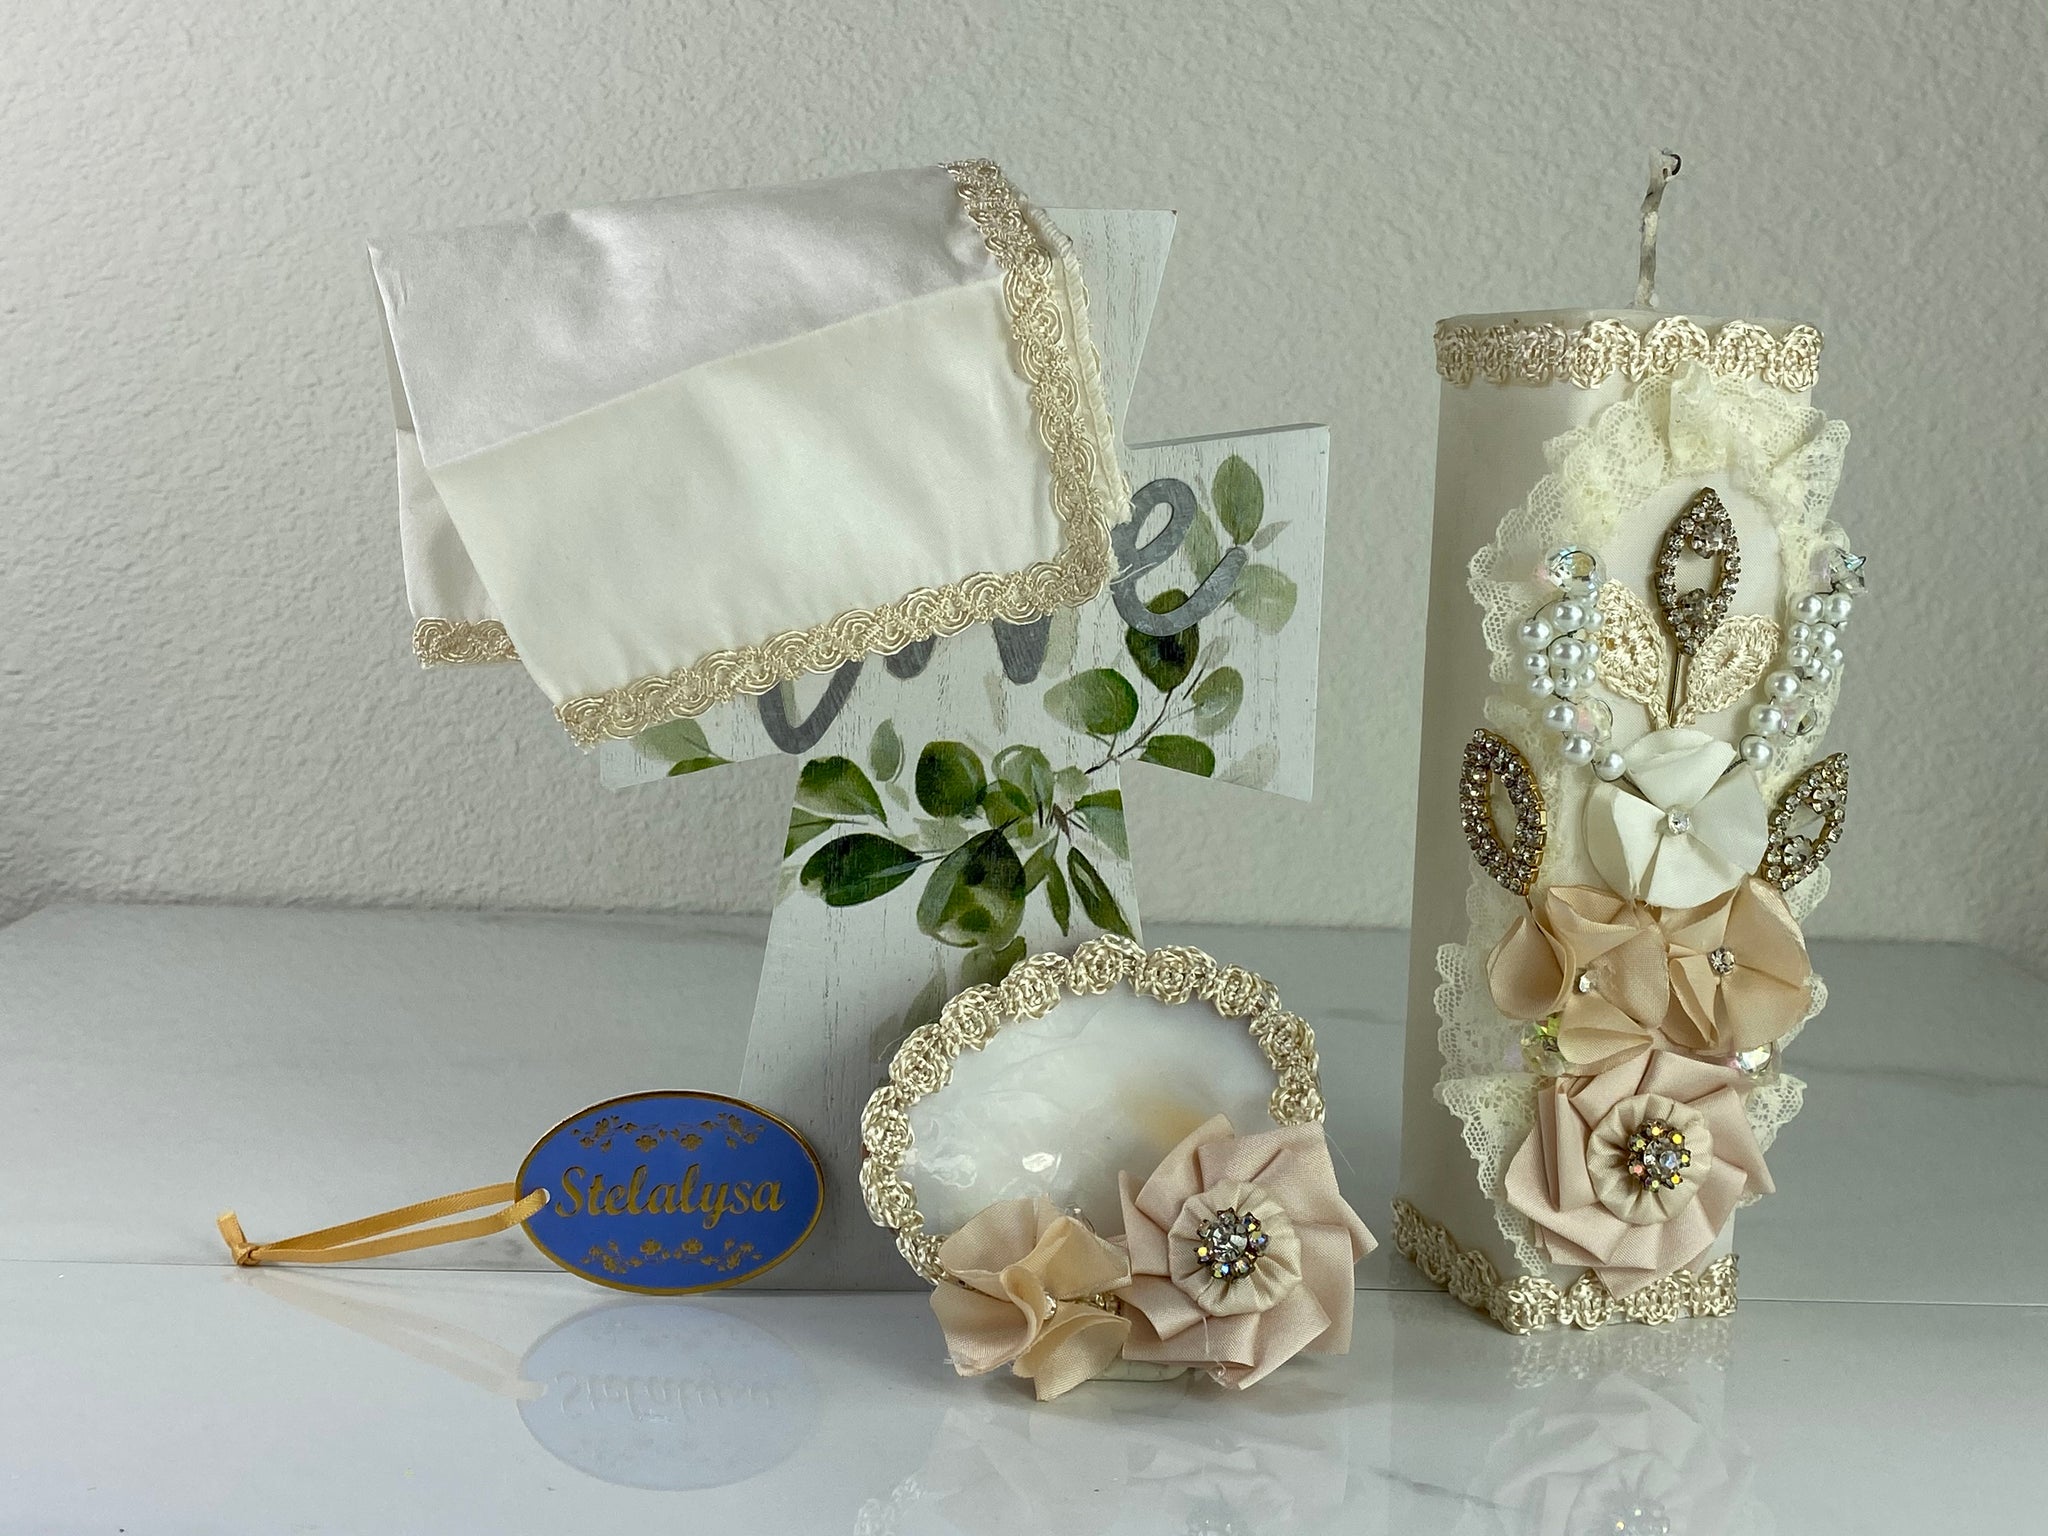 These one-of-a-kind Candle set is handmade and ivory in color.  This candle can also be use with a white baptism outfit because it has an array of light colors including white.   It is uniquely decorated with ribbon, pearls, crystals, flowers, and beads making it a gorgeous keepsake.   This candle is square in shape.    To match, the Shell is put together piece by piece to compliment the Candle and Handkerchief.  The Handkerchief is made of satin and embroidered lace 